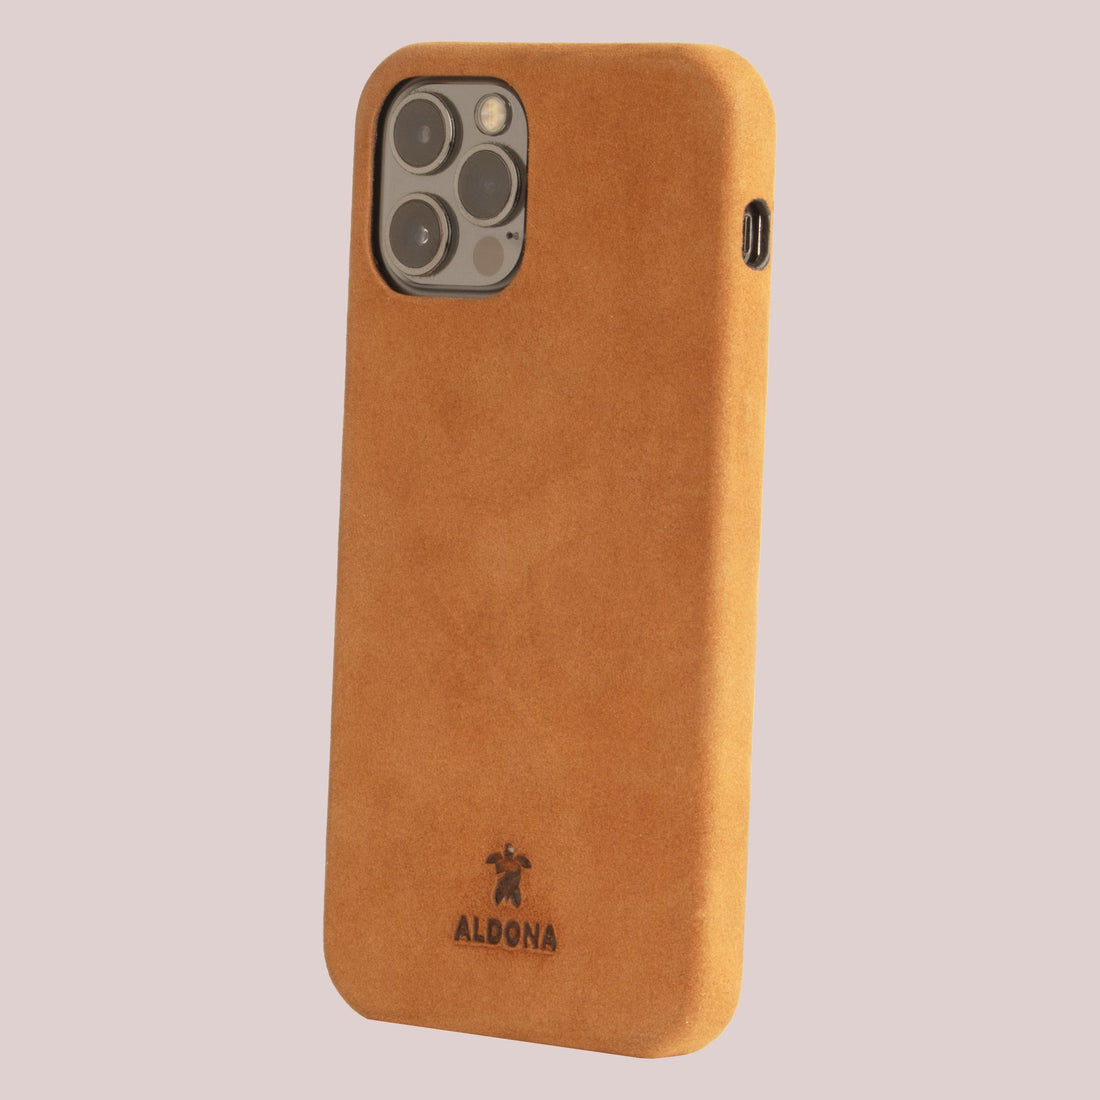 Kalon Case for iPhone 13 with MagSafe Compatibility - Vintage Tan